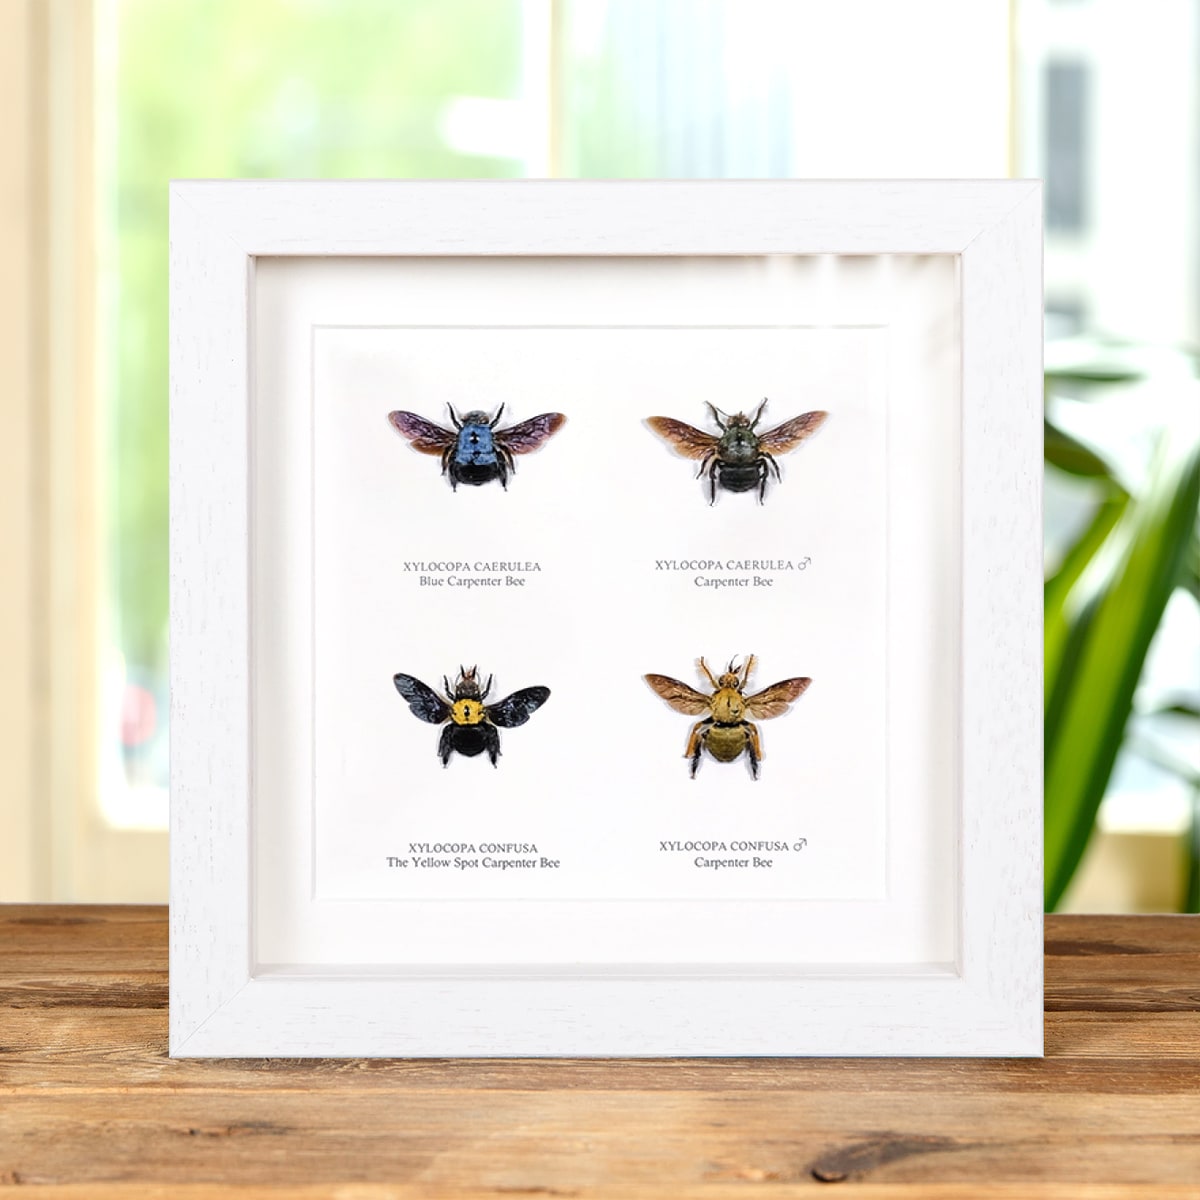 Carpenter Bee Display in Box Frame (Xylocopa sp)